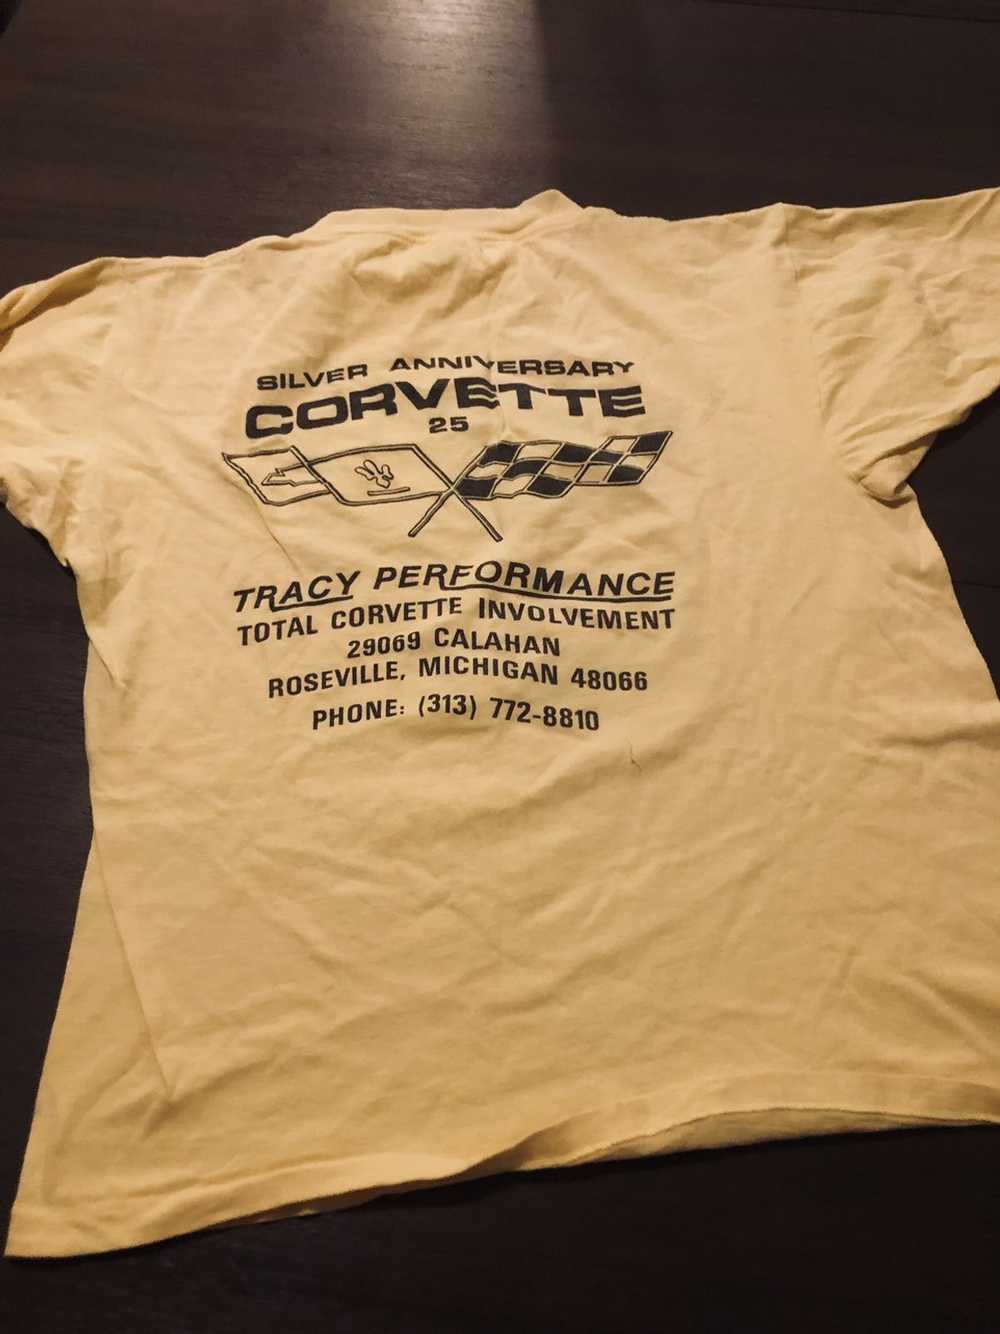 Vintage Vgt 70s the Mongoose Tom McEWEN tee rare - image 3